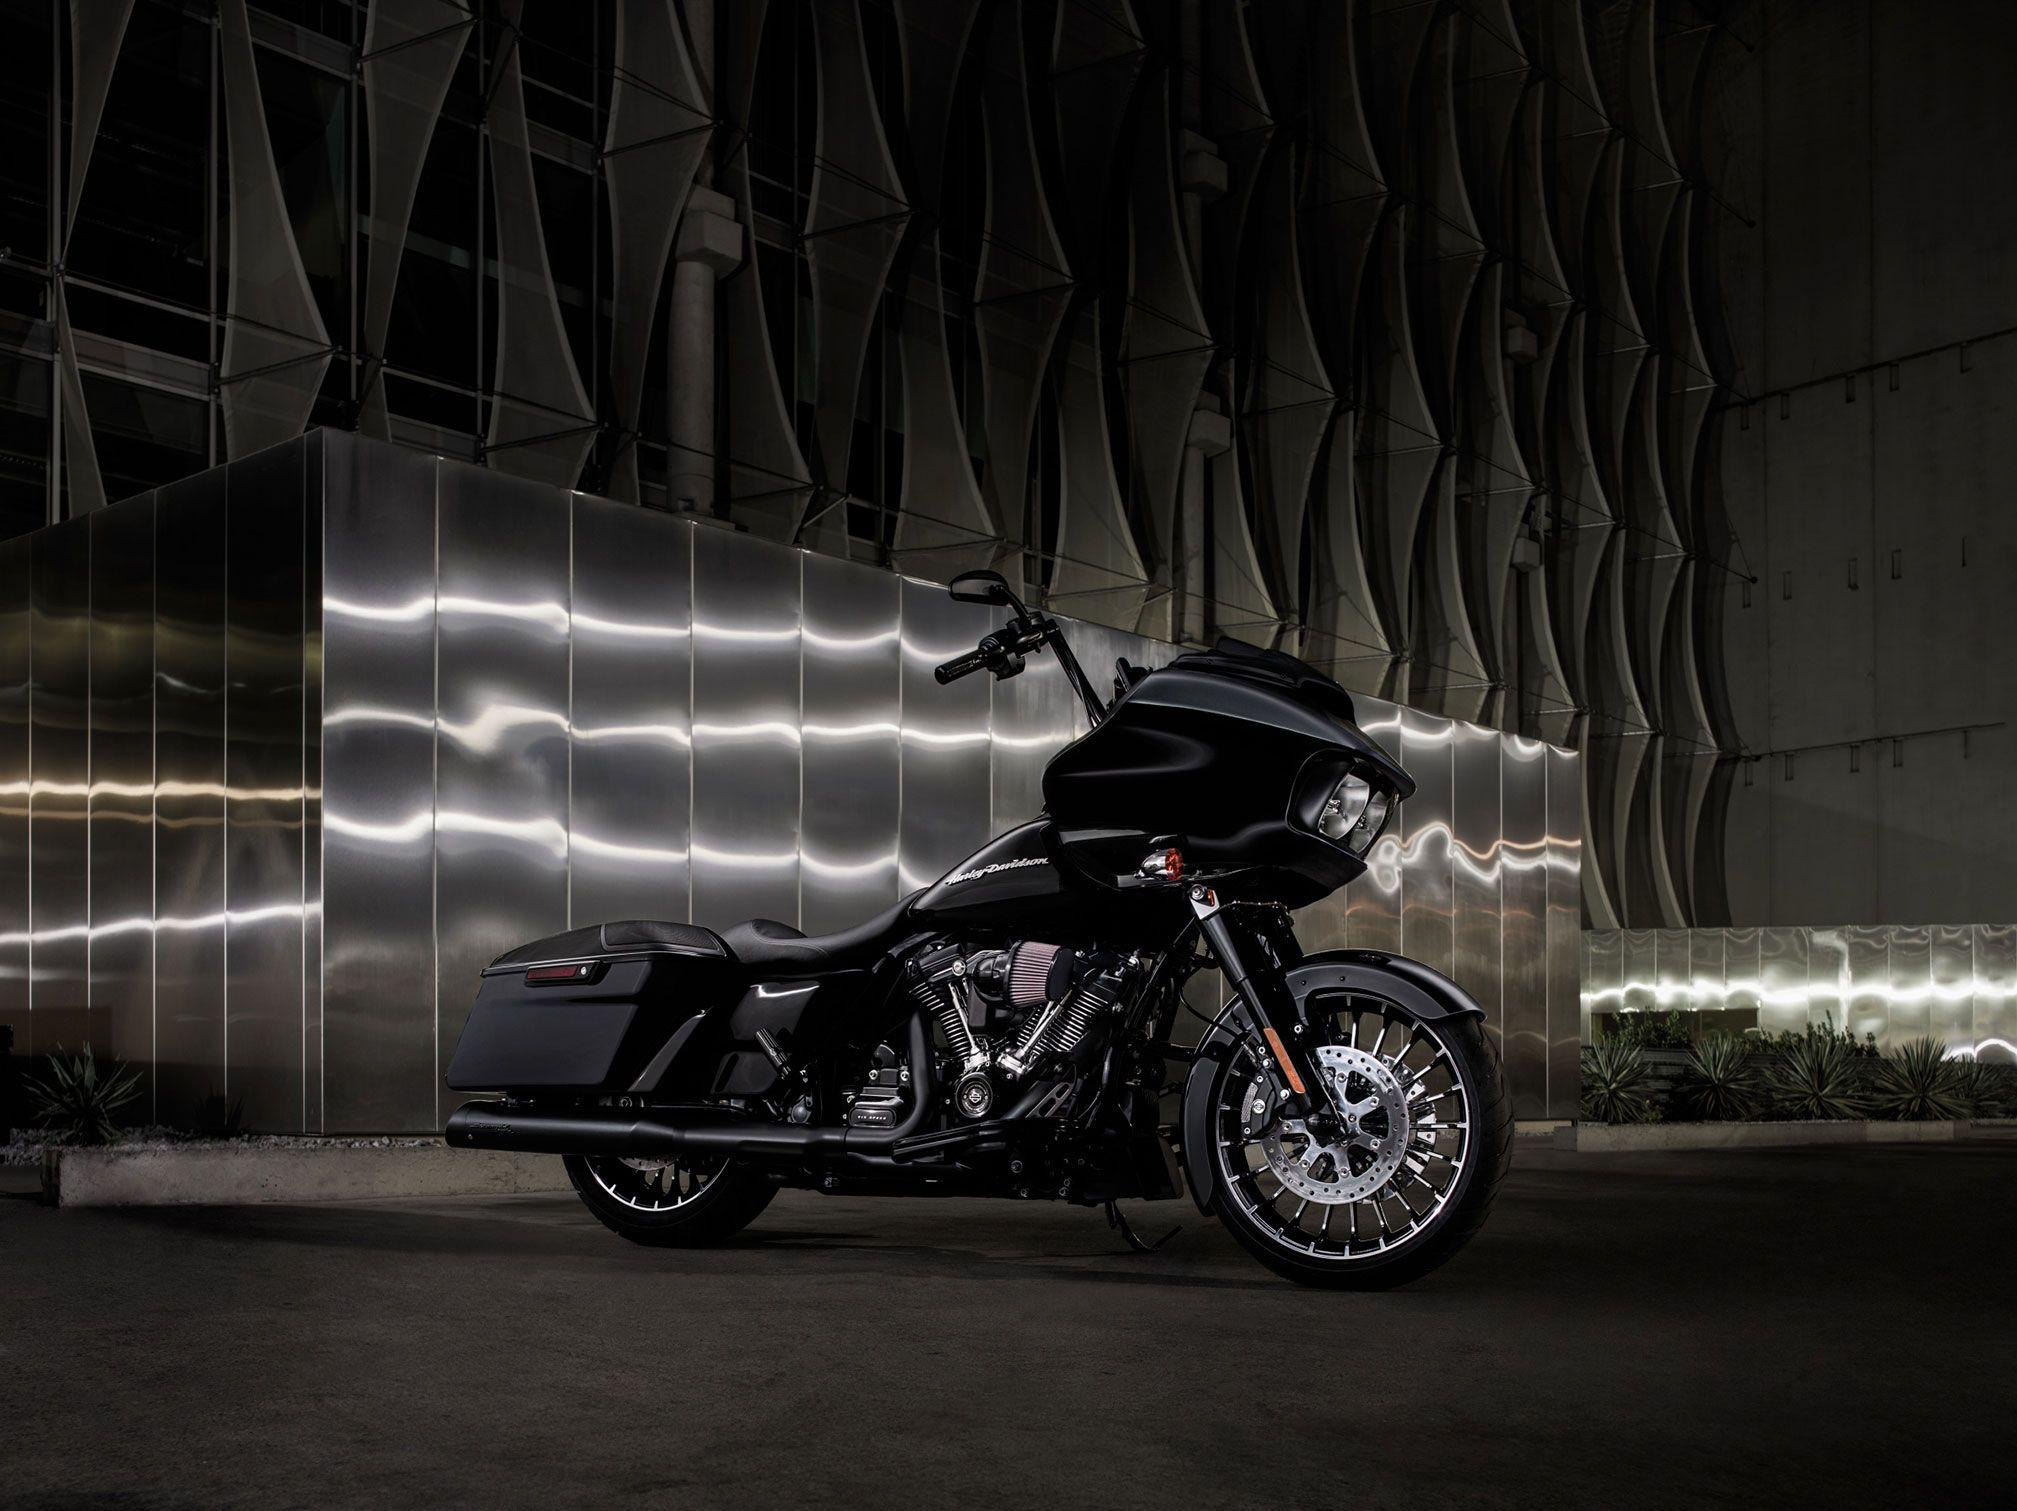 Road Glide Wallpapers - Top Free Road